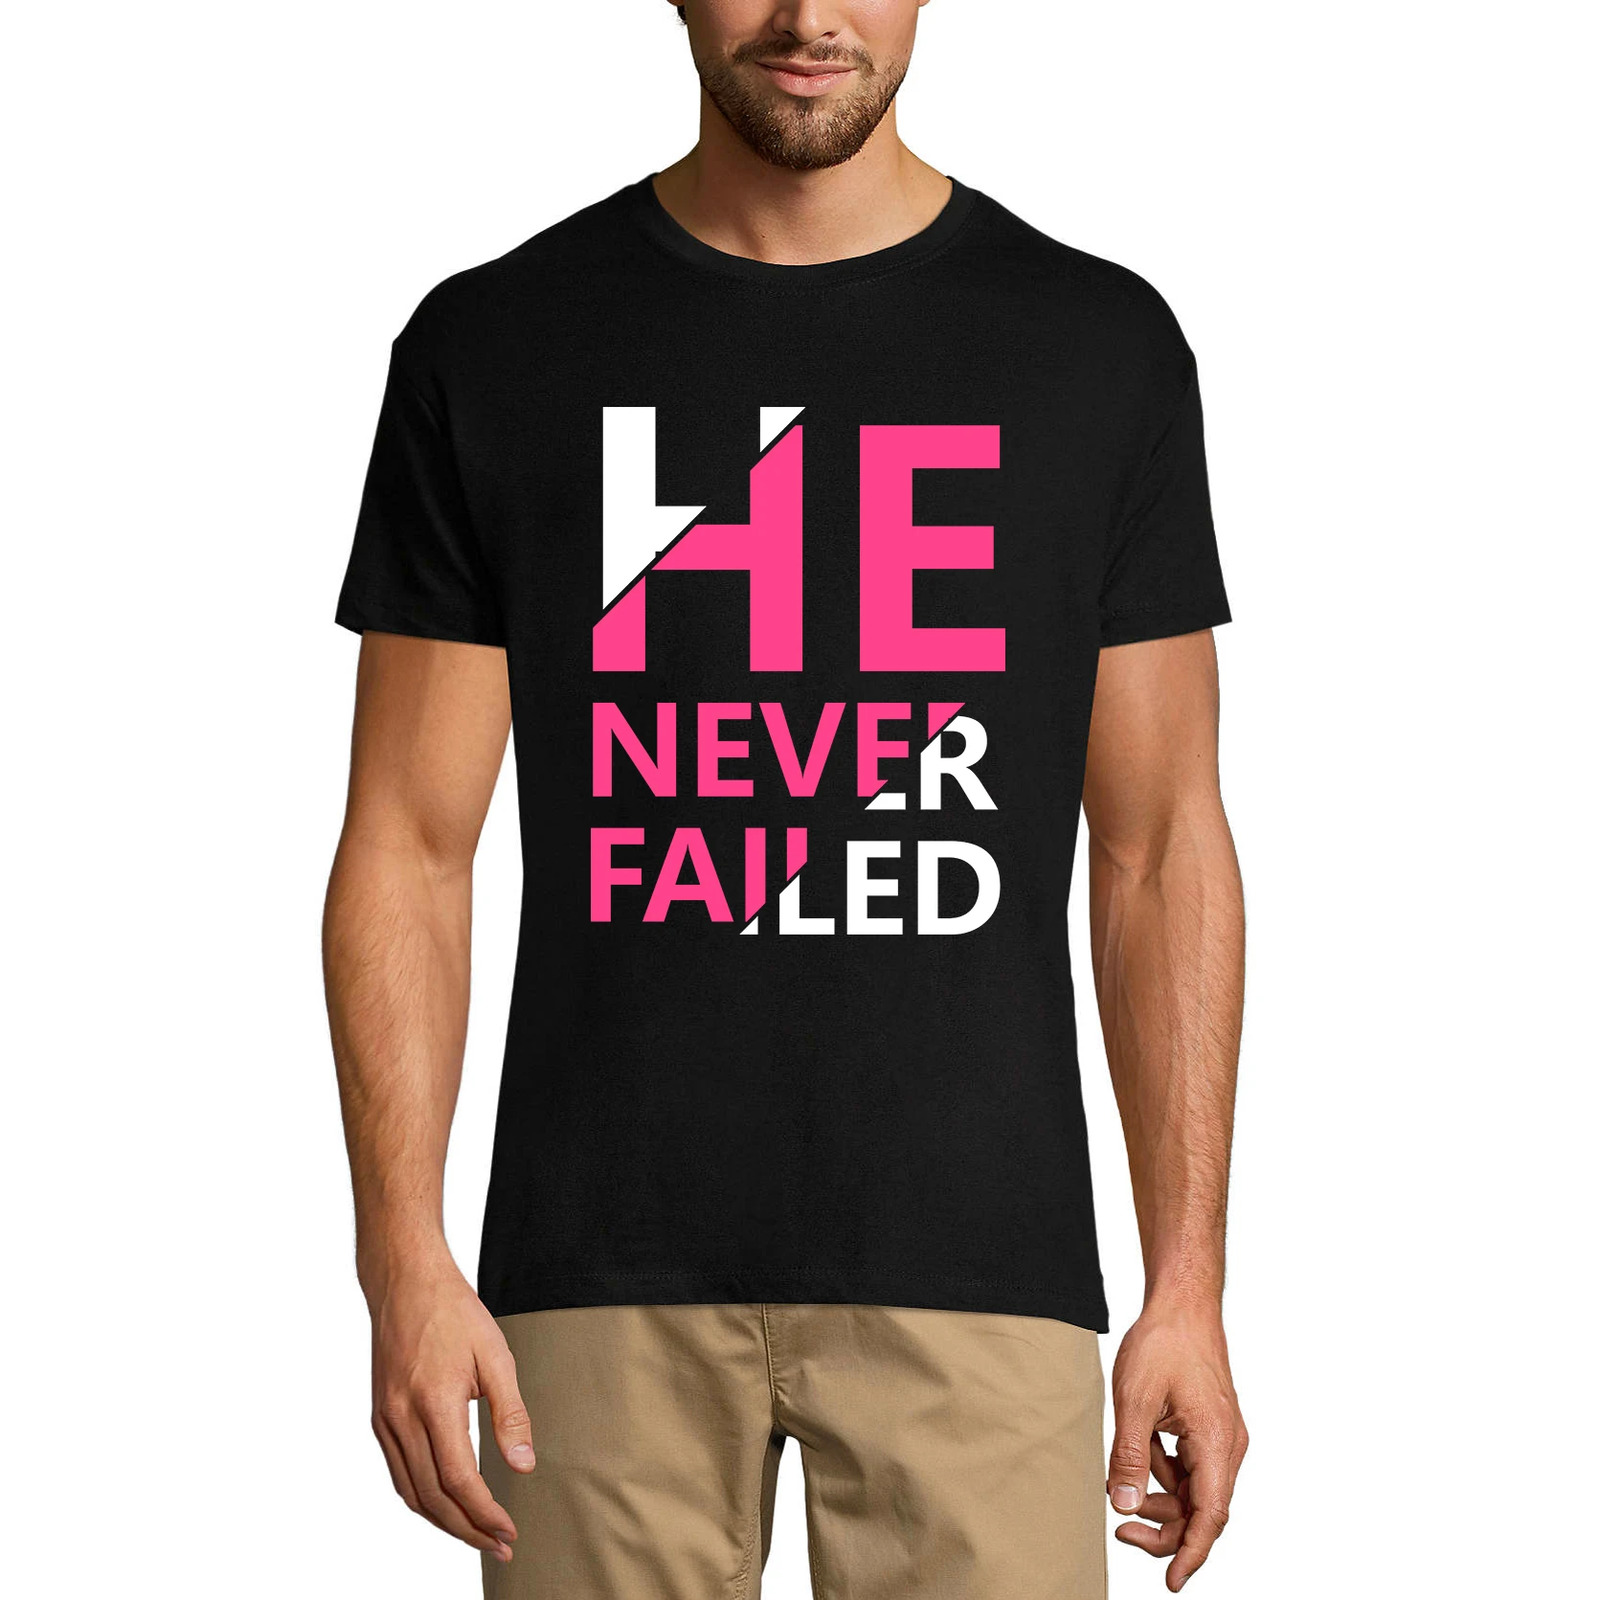 ULTRABASIC Graphic Men's T-Shirt He Never Failed - Motivational Quote